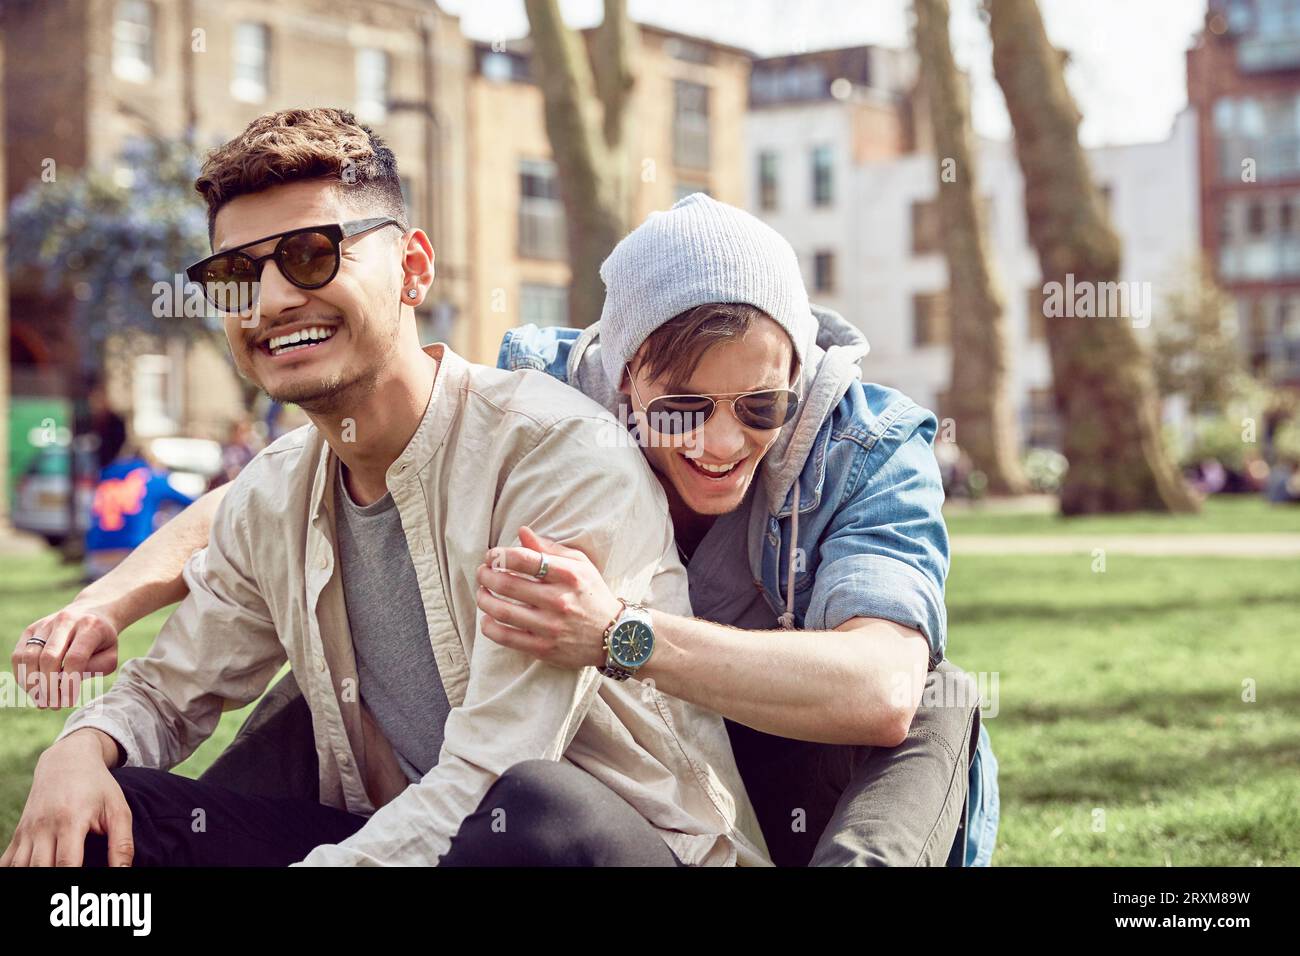 Gay teenage couple sitting together in park Stock Photo